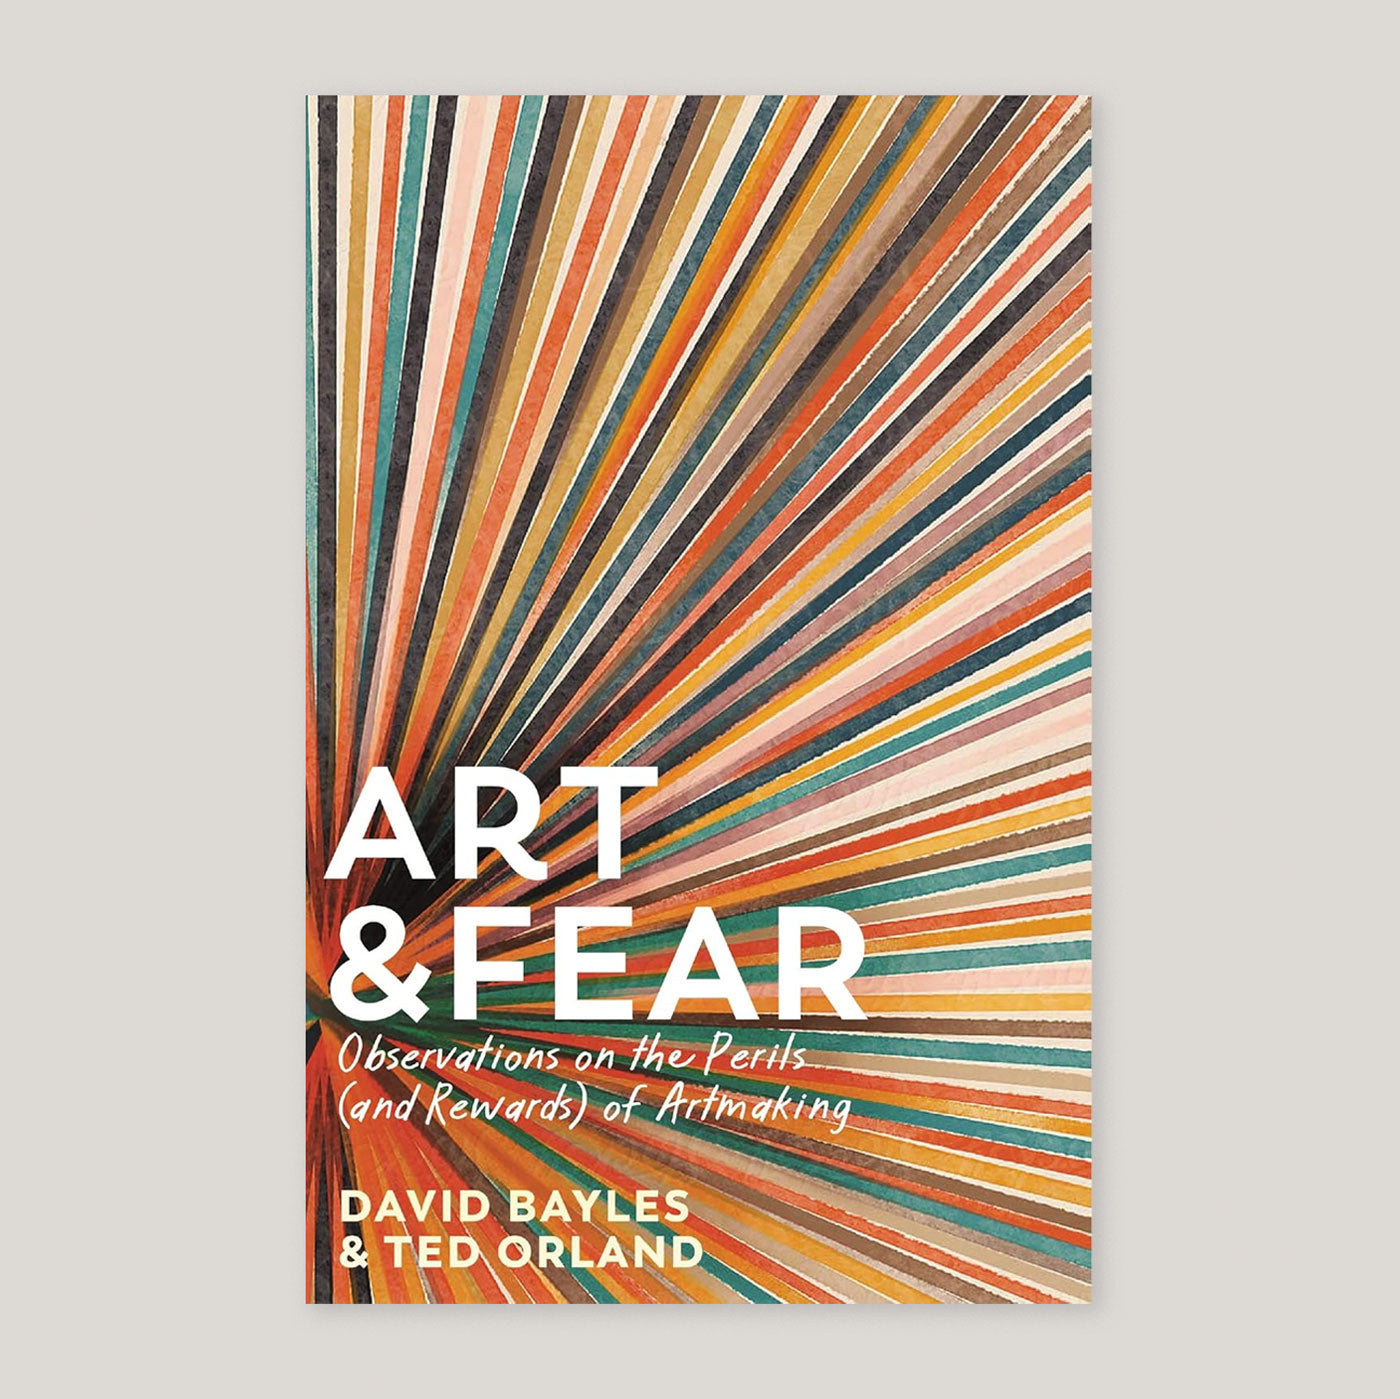 Art & Fear: Observations on the Perils (and Rewards) of Artmaking | David Bayles and Ted Orland